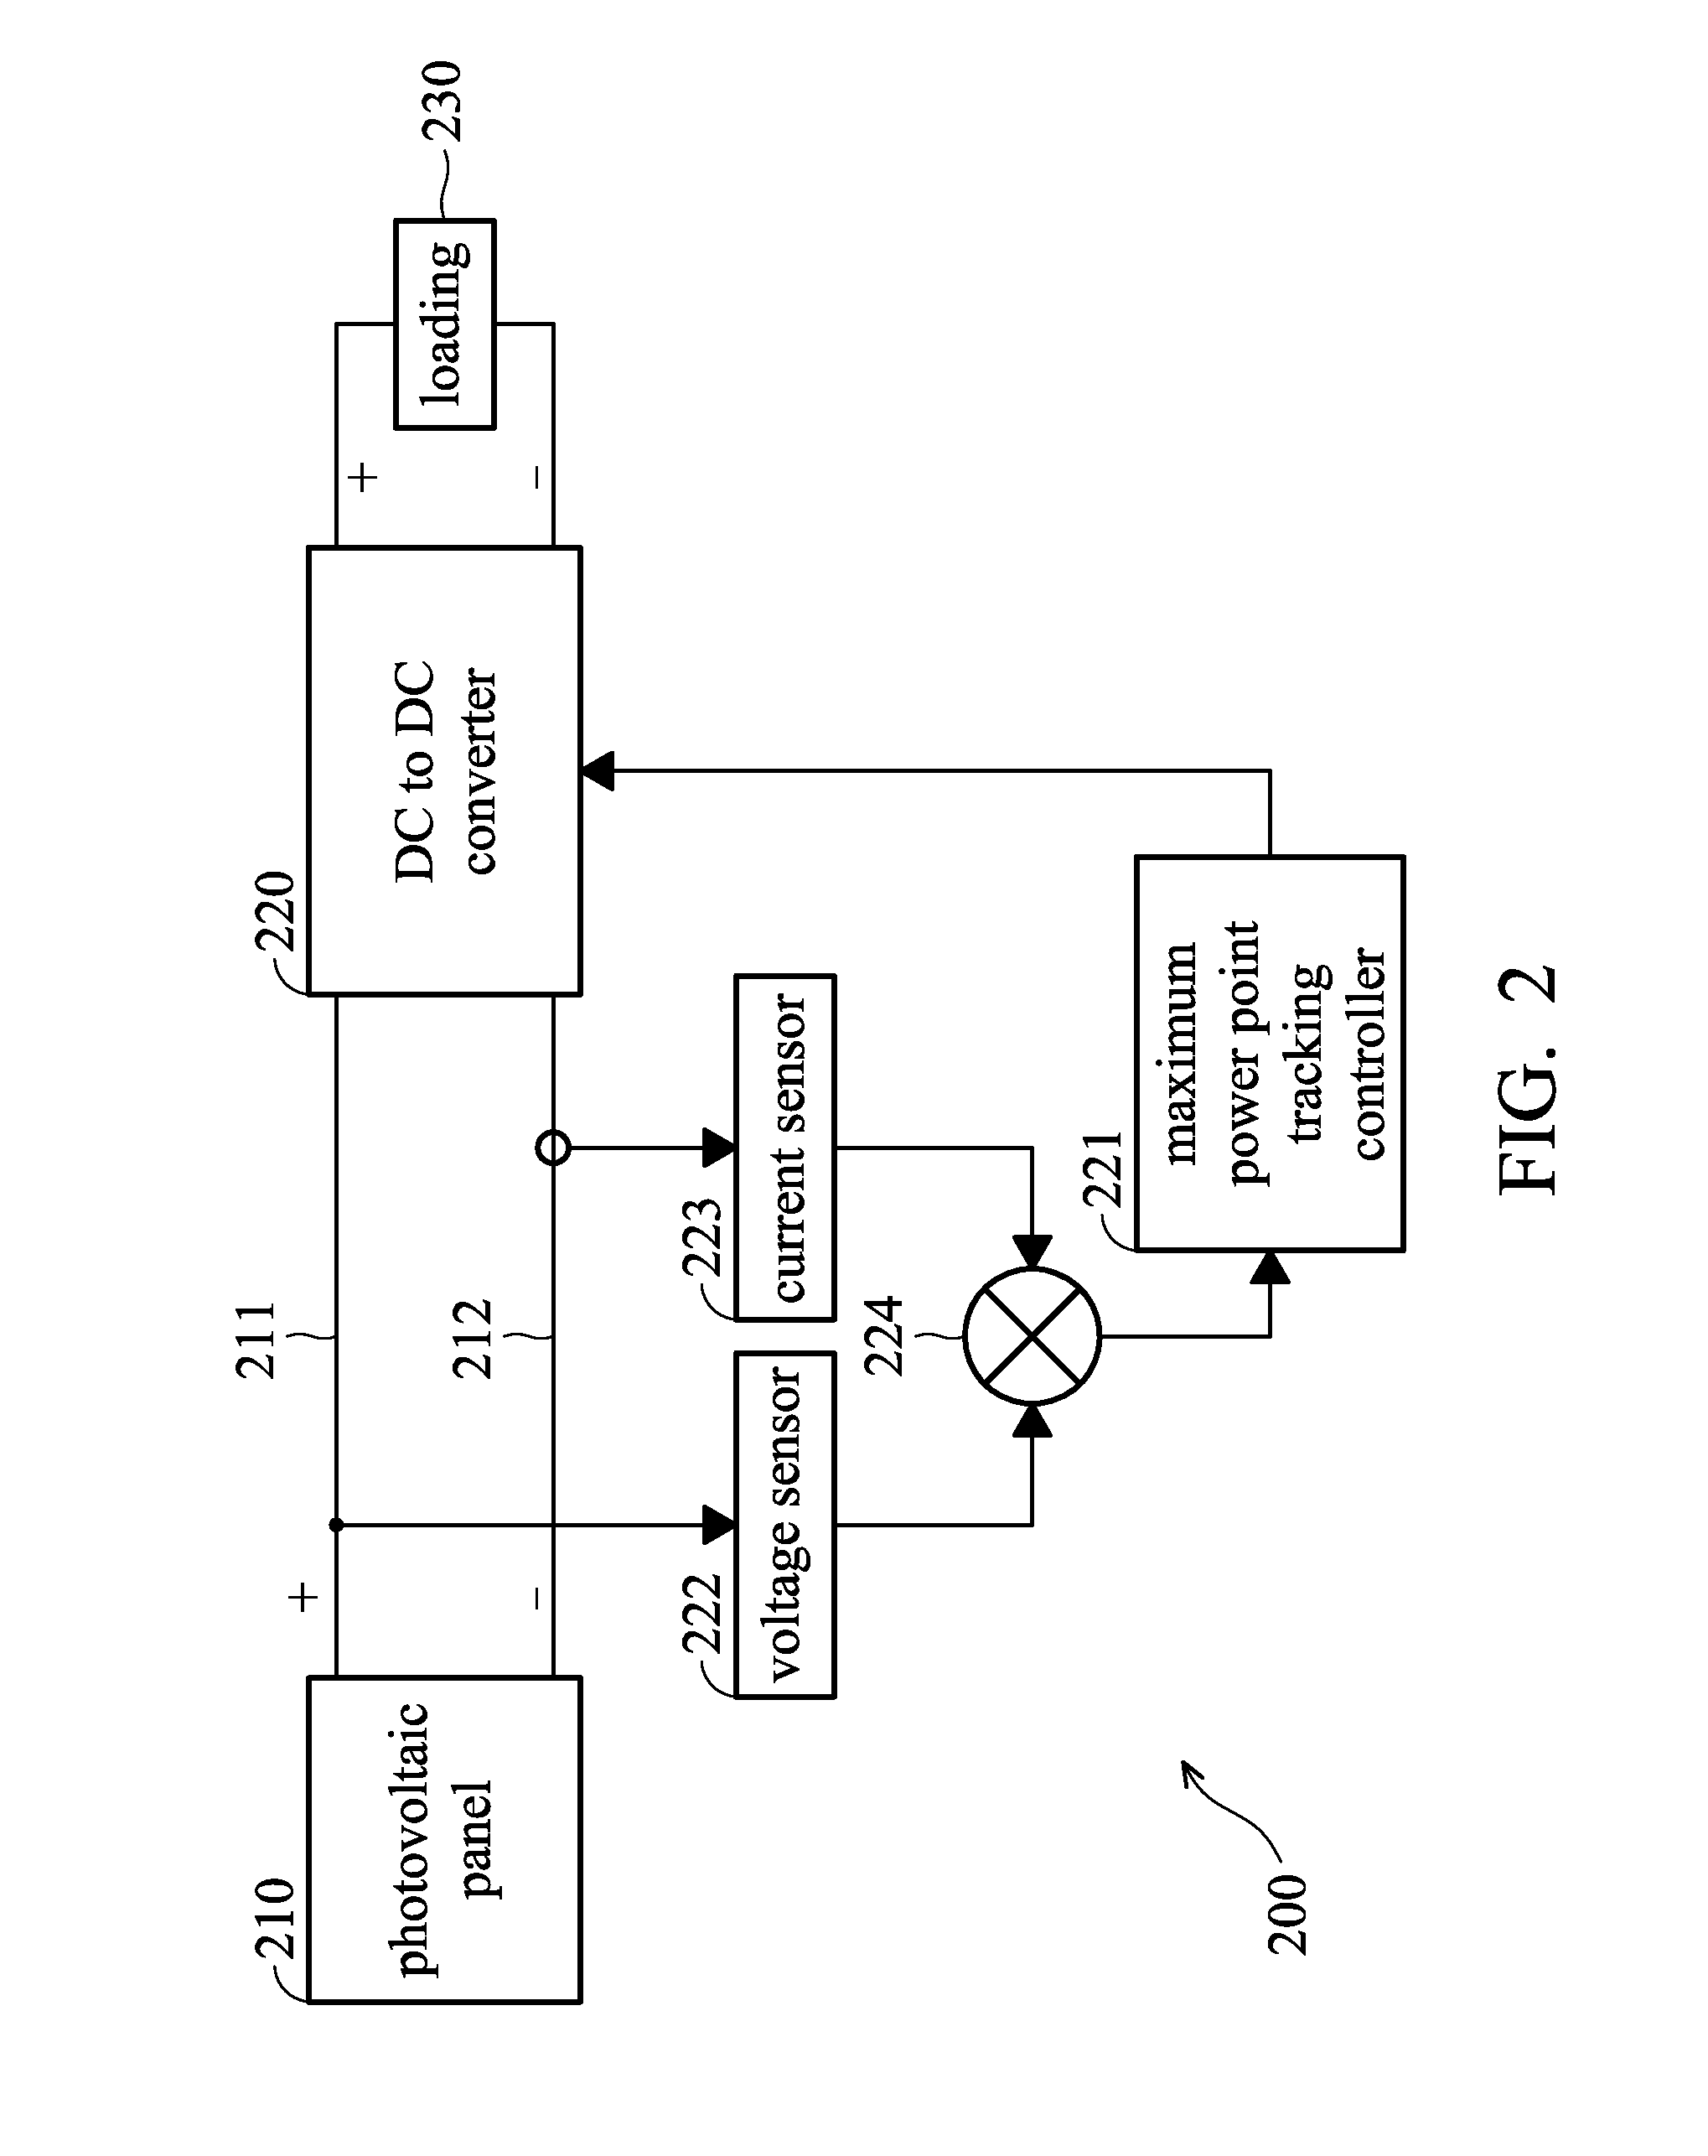 DC power source conversion modules, power harvesting systems, junction boxes and methods for DC power source conversion modules